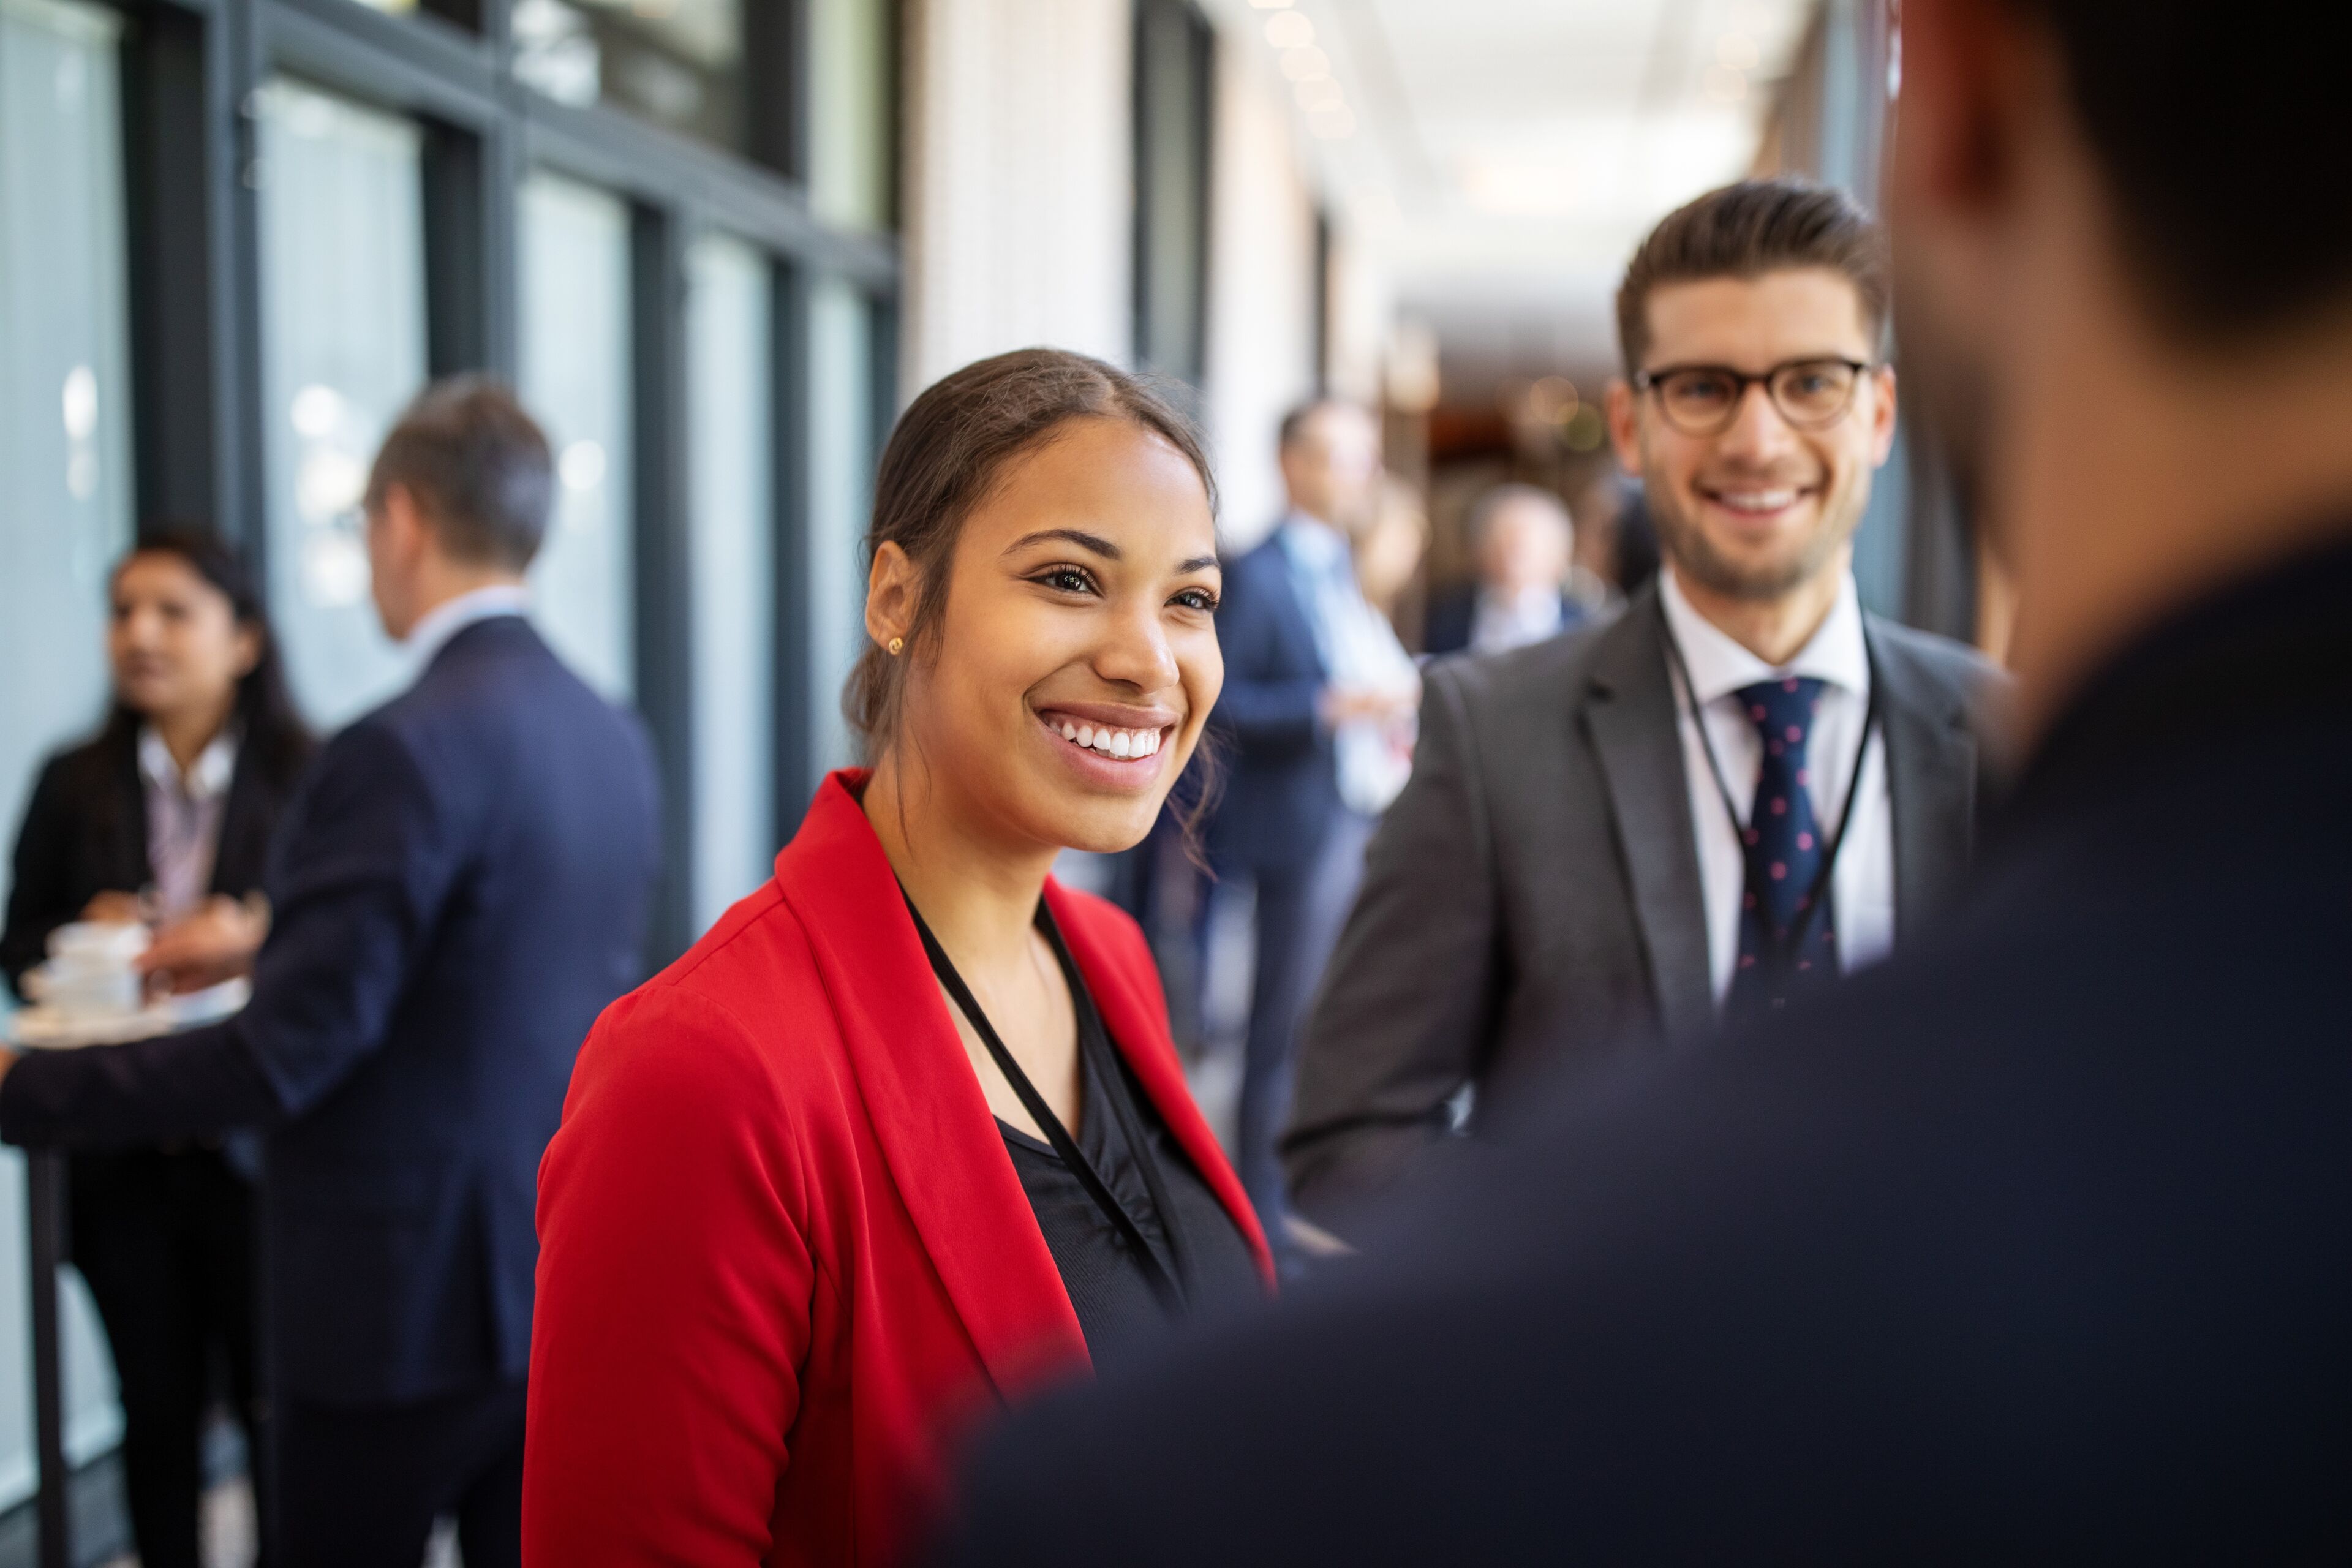 Smiling professionals engage in conversation at a networking event, with a focus on interpersonal connection.
